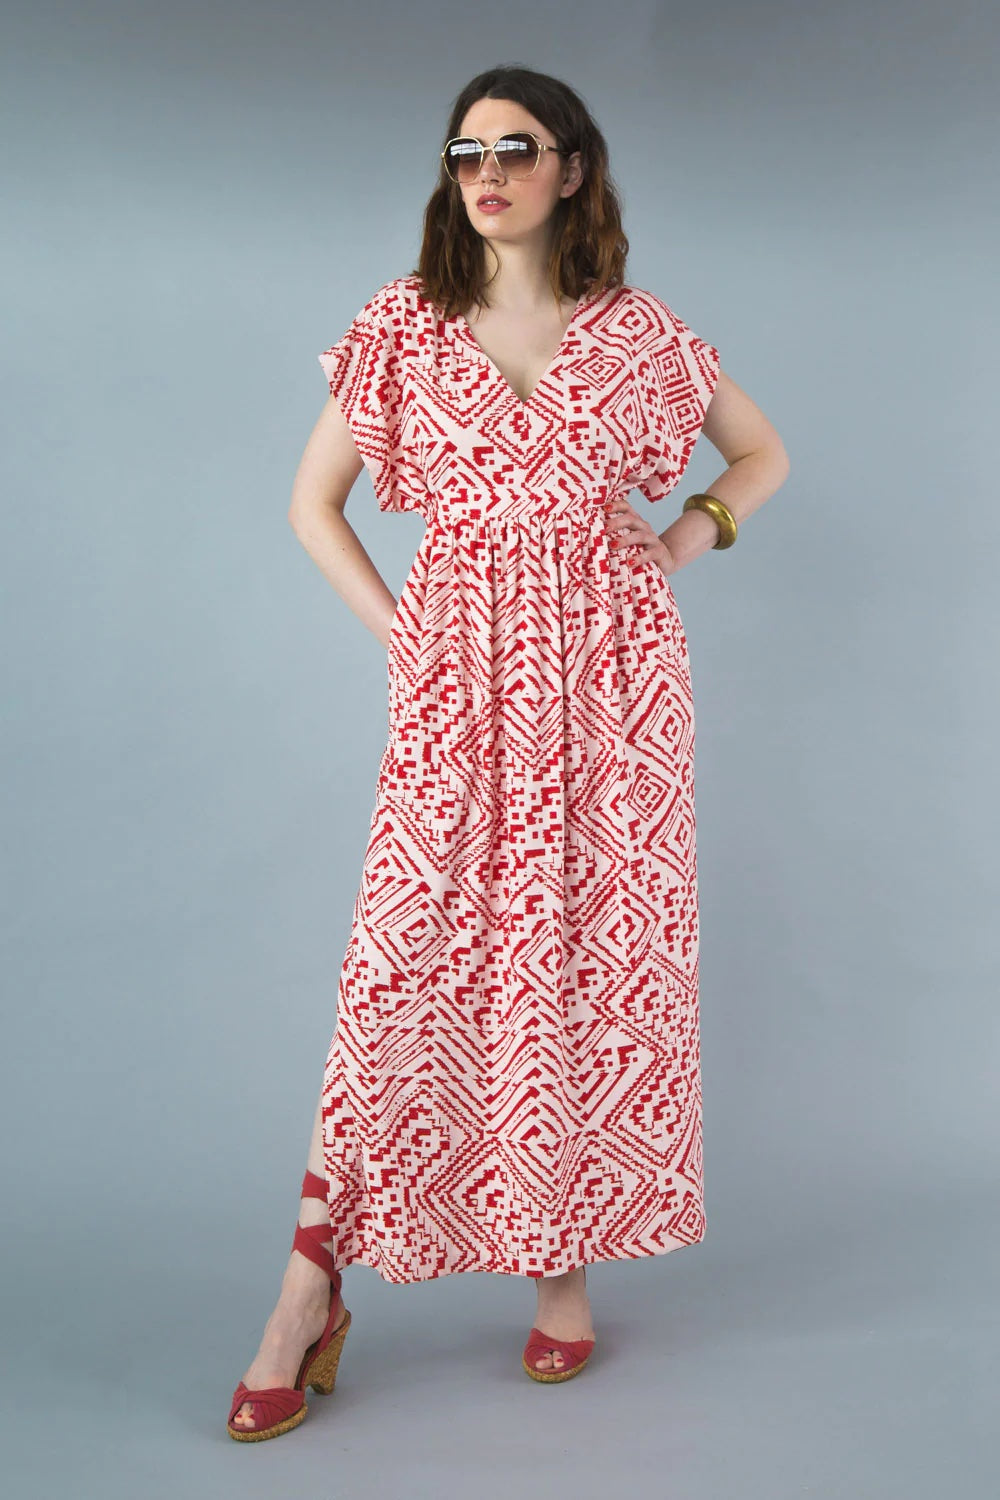 Woman wearing the Charlie Caftan sewing pattern by Closet Core Patterns. A dress pattern made in linen, chambray, silk, chiffon or rayon crepe fabric featuring a deep V-neckline, short dolman sleeves, roomy pockets and a back waist tie.